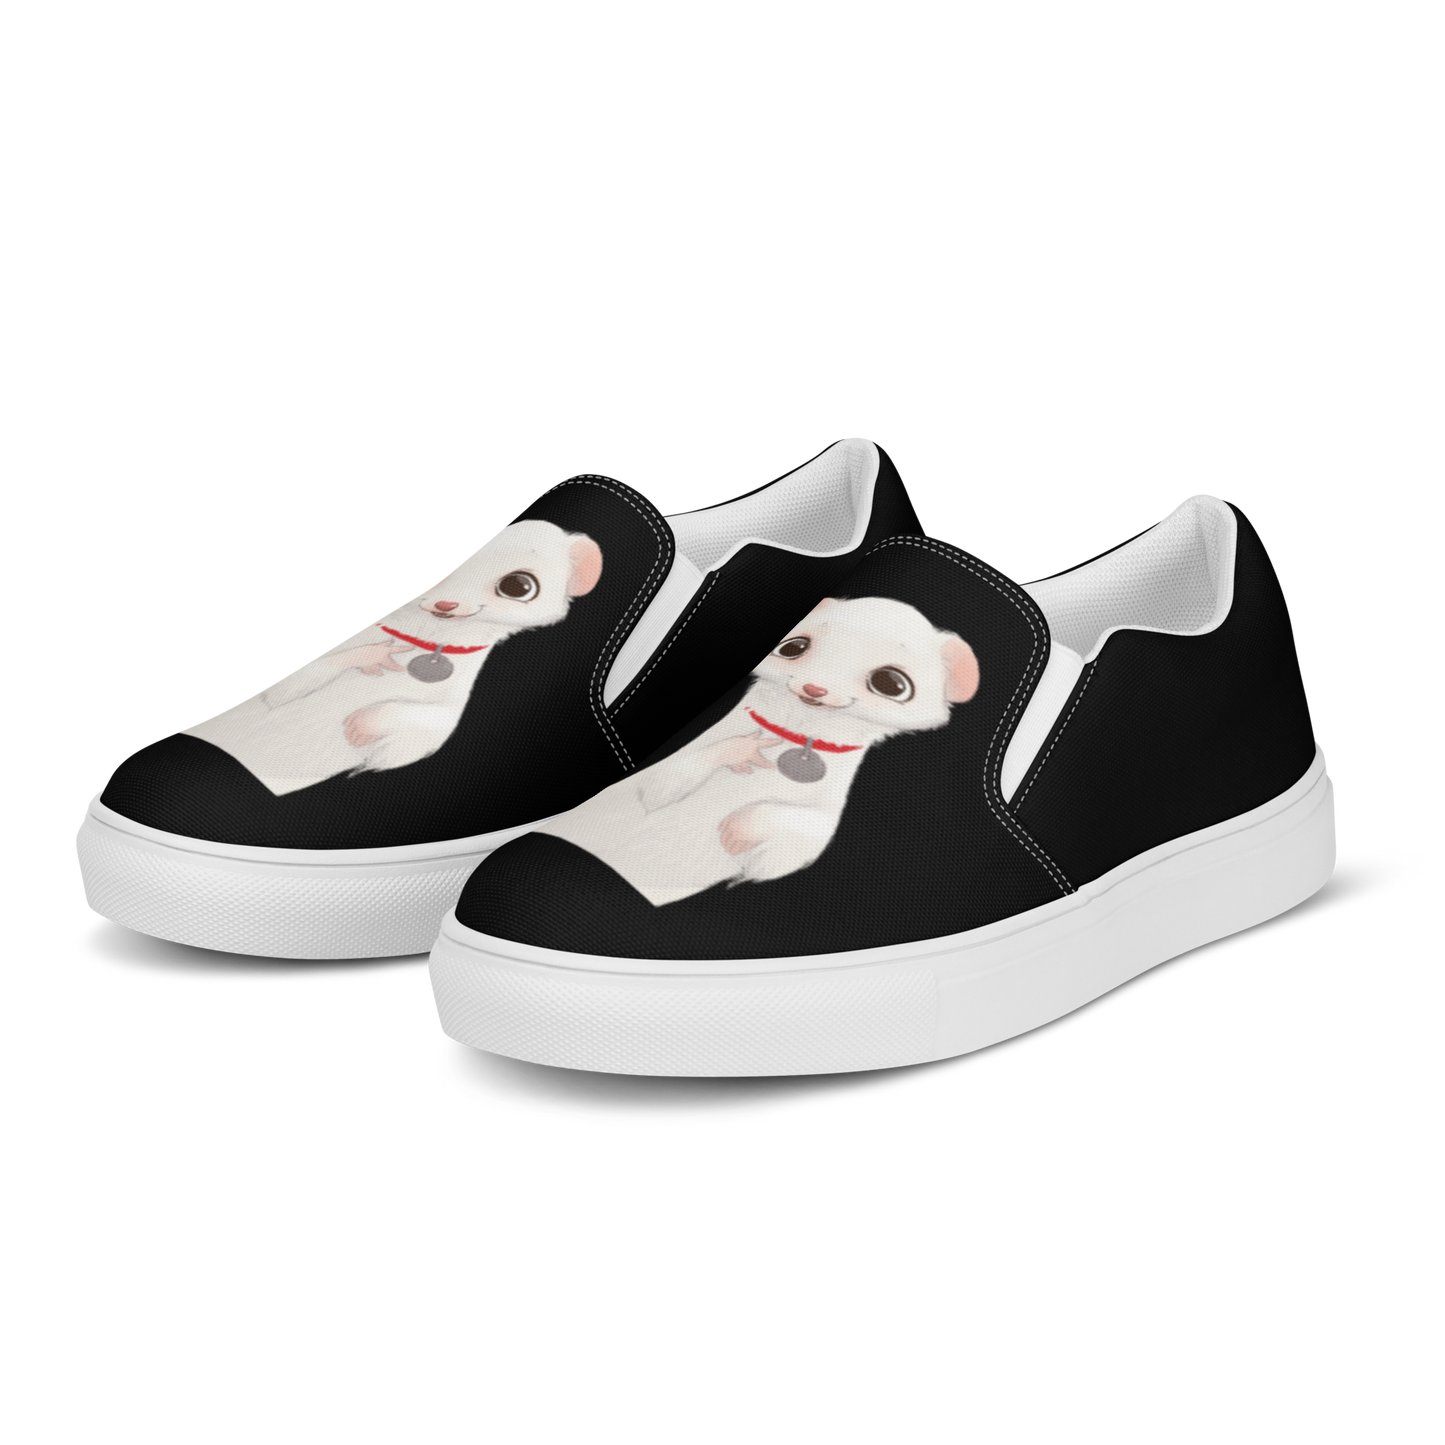 "My Name is Musky! A Ferret's Story Men’s Slip-On Canvas Shoes!